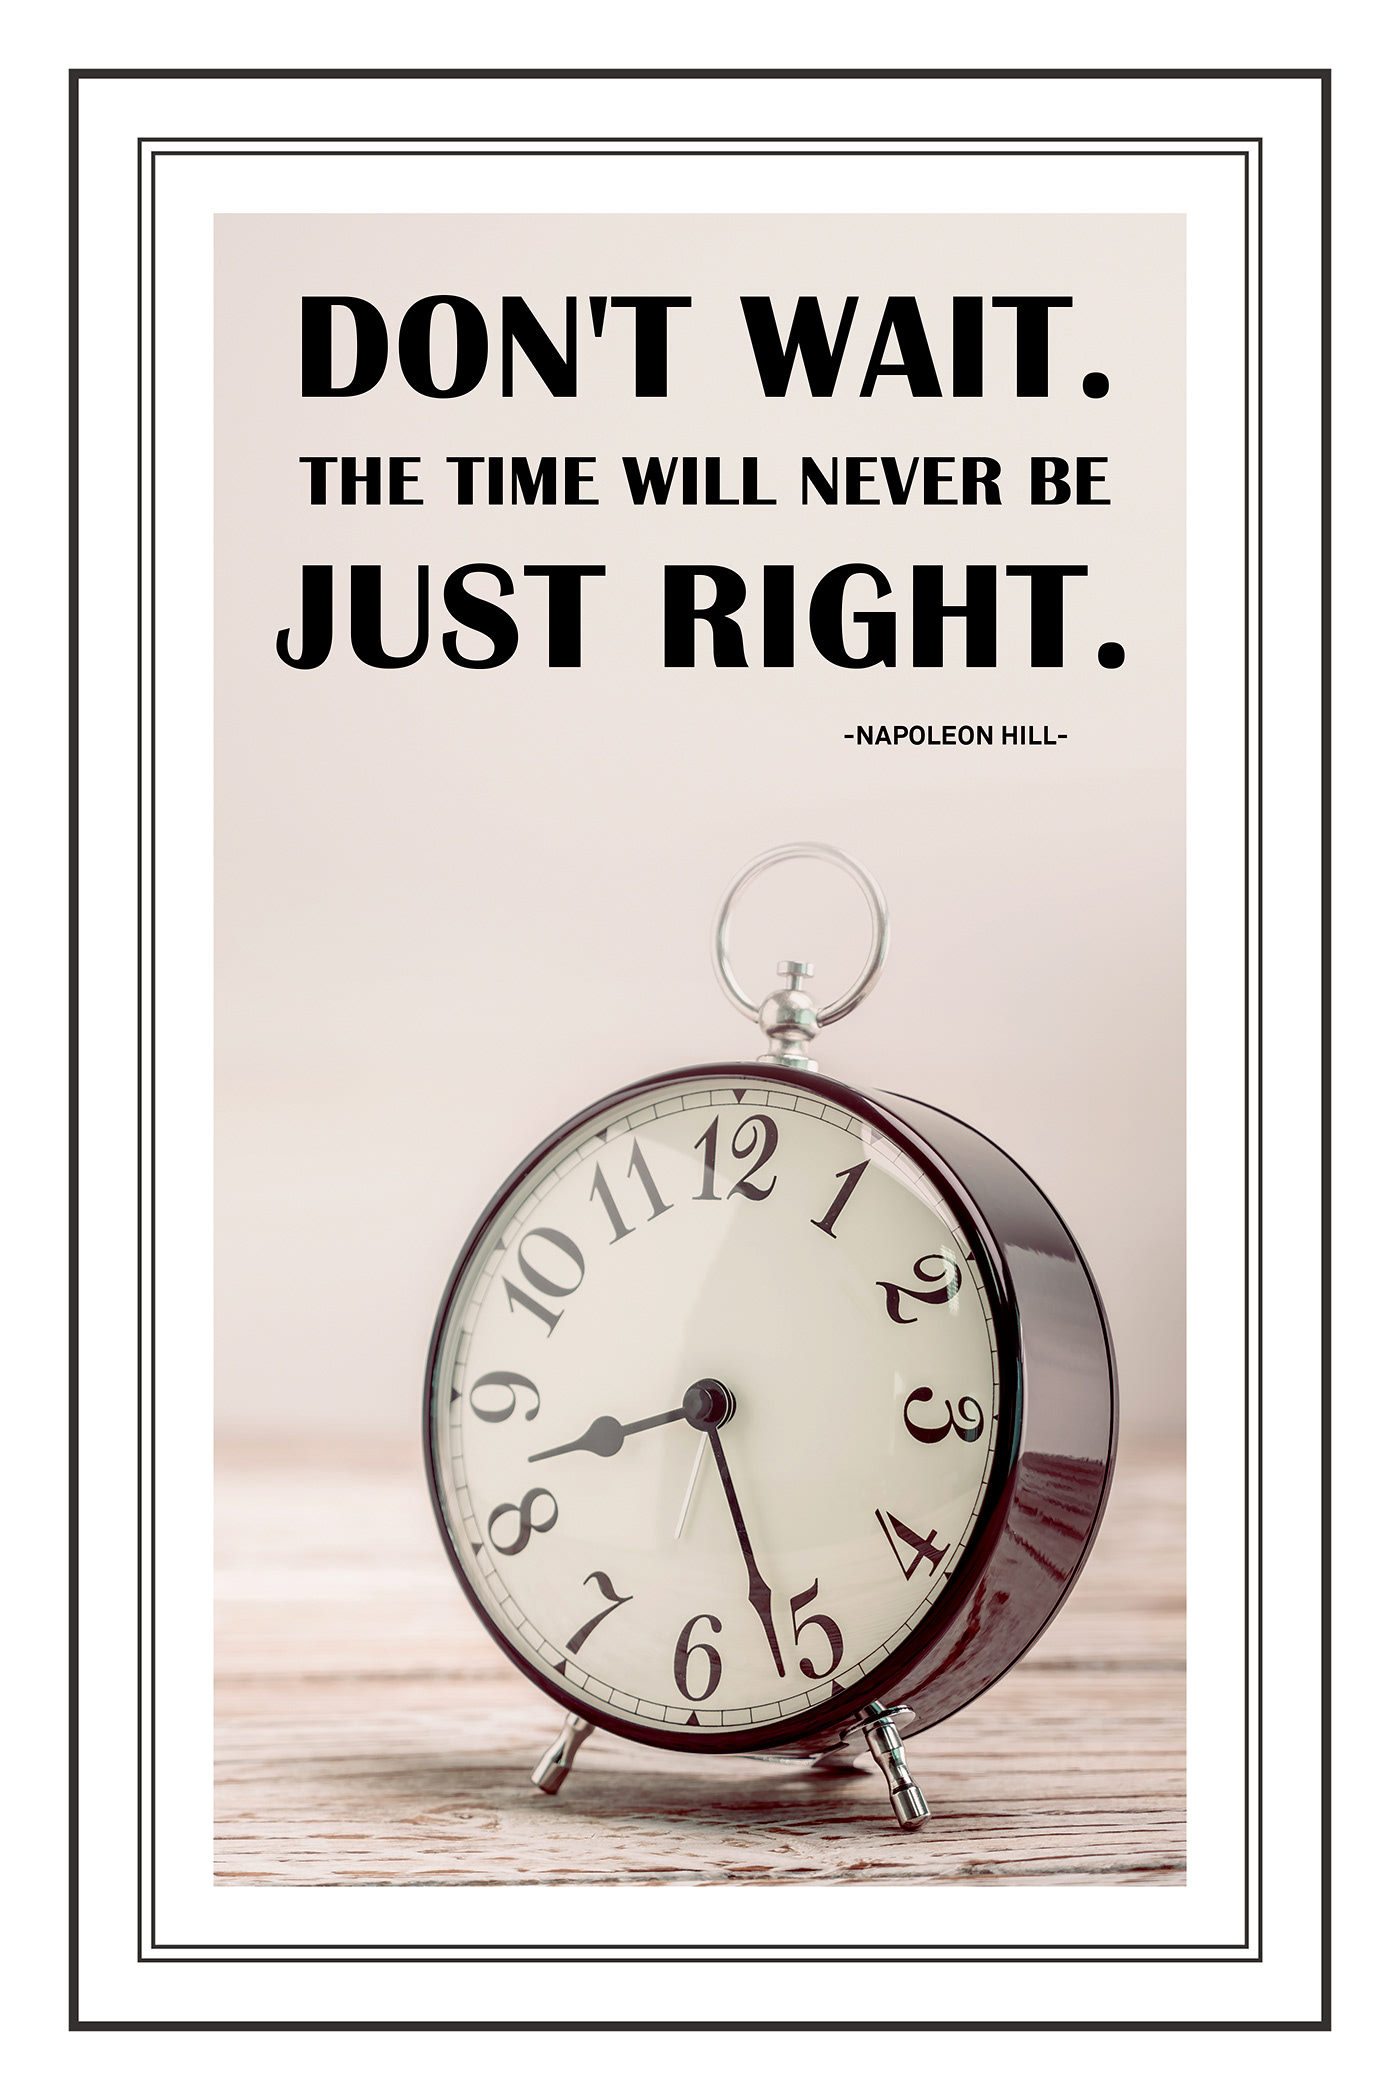 Don't wait the time will never be just right